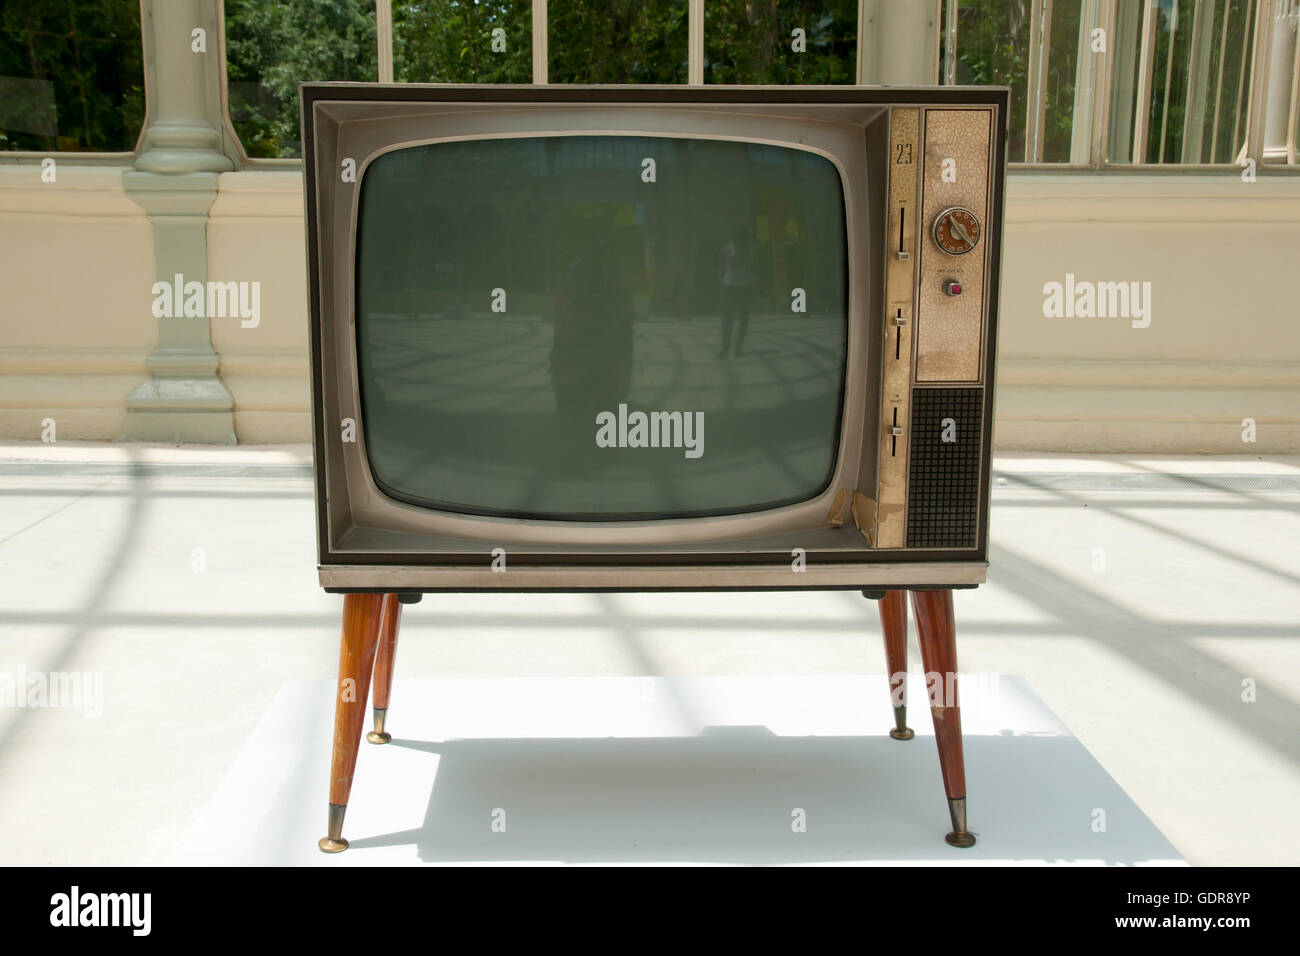 Old Television Set Stock Photo